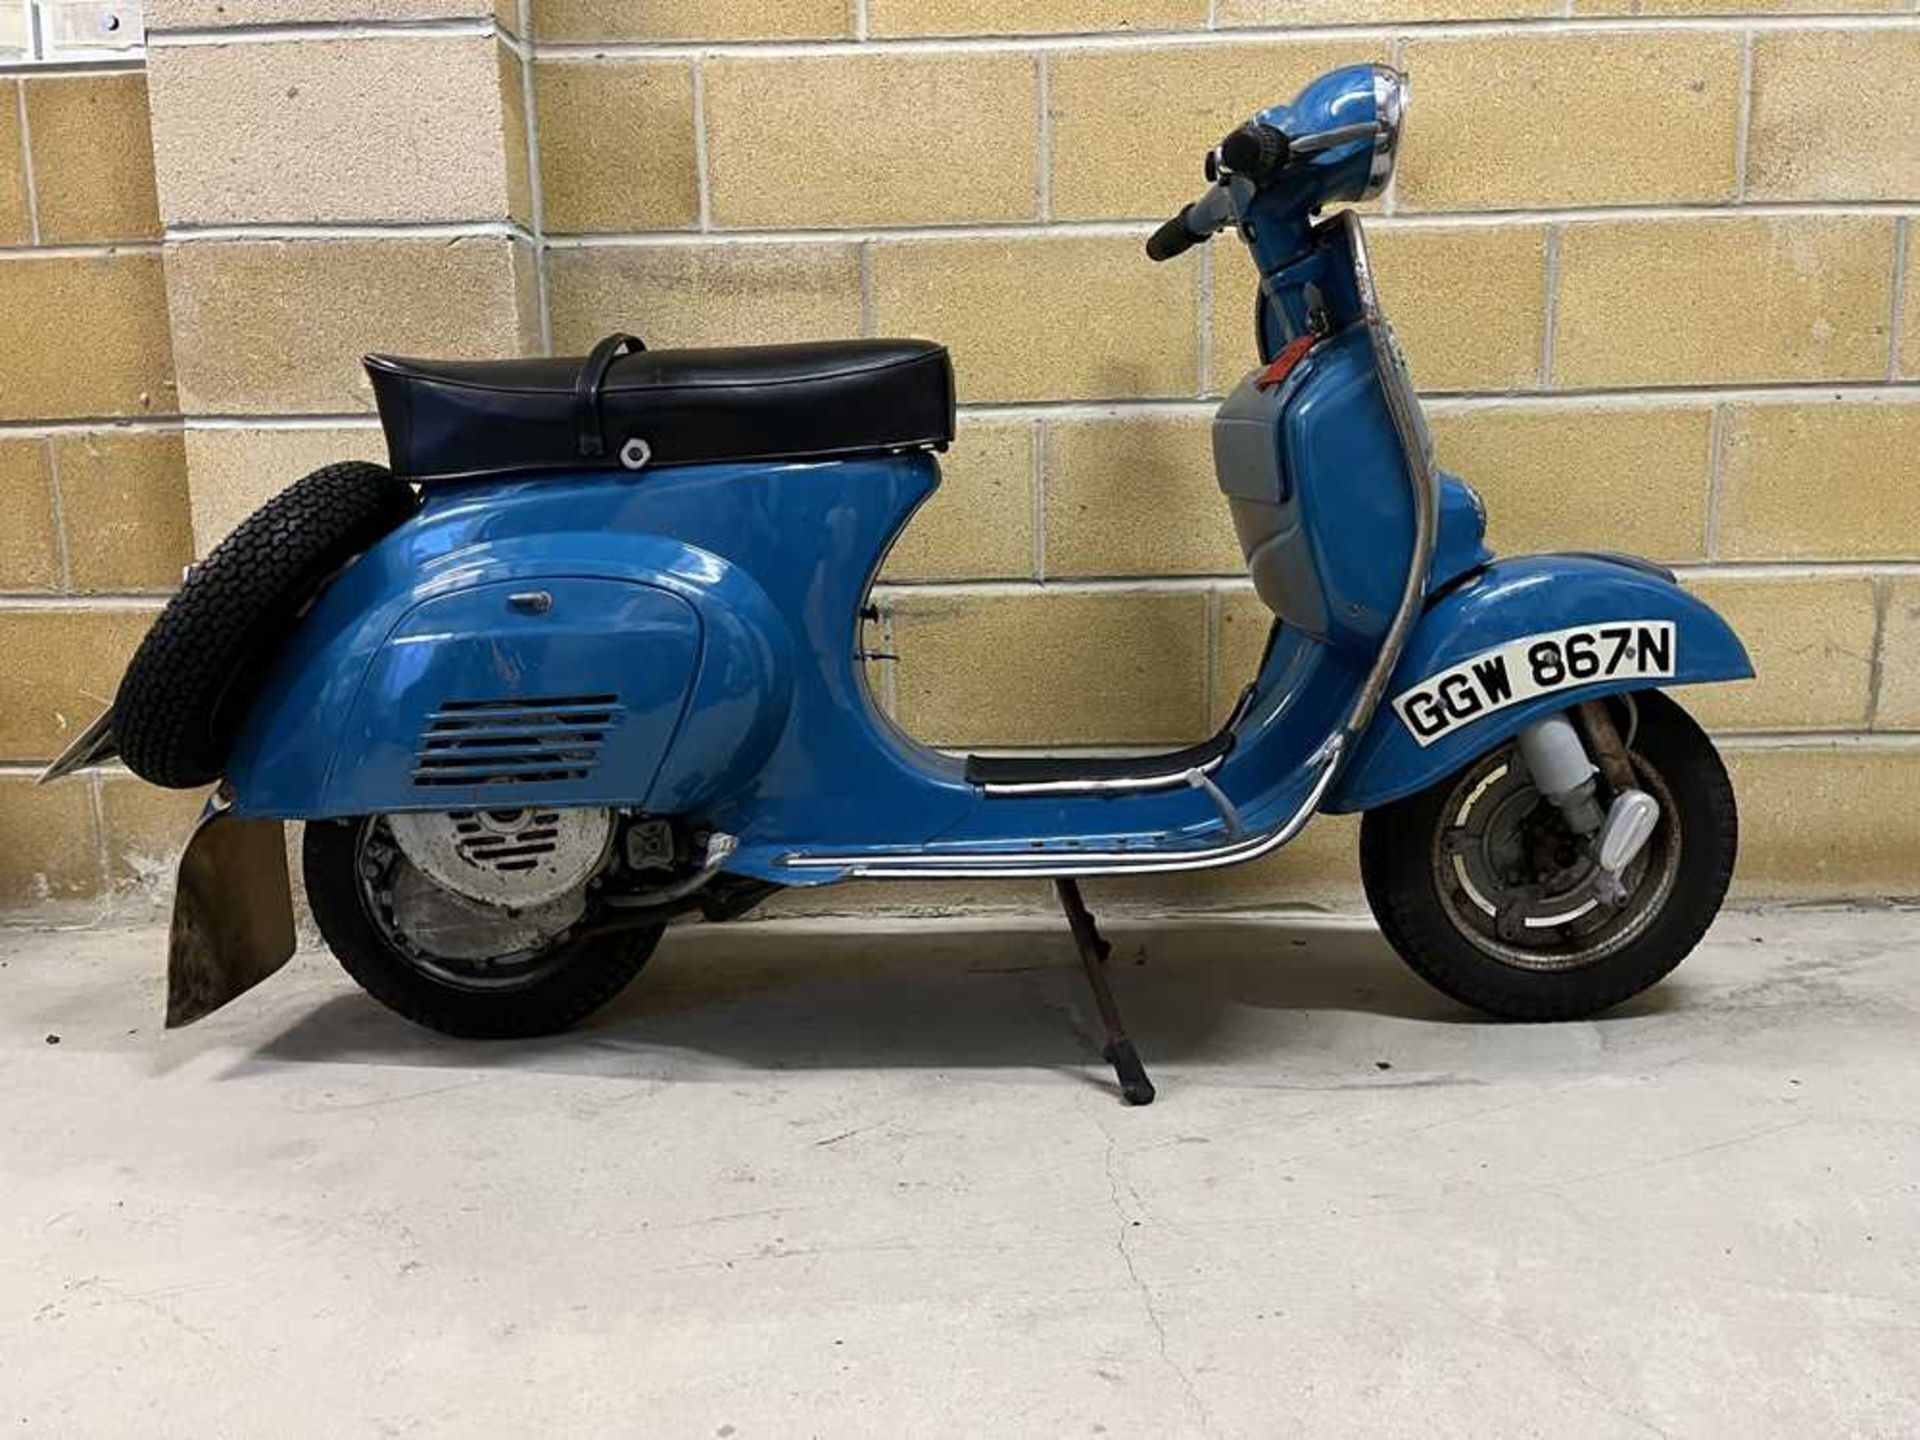 1974 Vespa (Douglas) Motovespa SU66 125 Super Extremely original and one owner from new